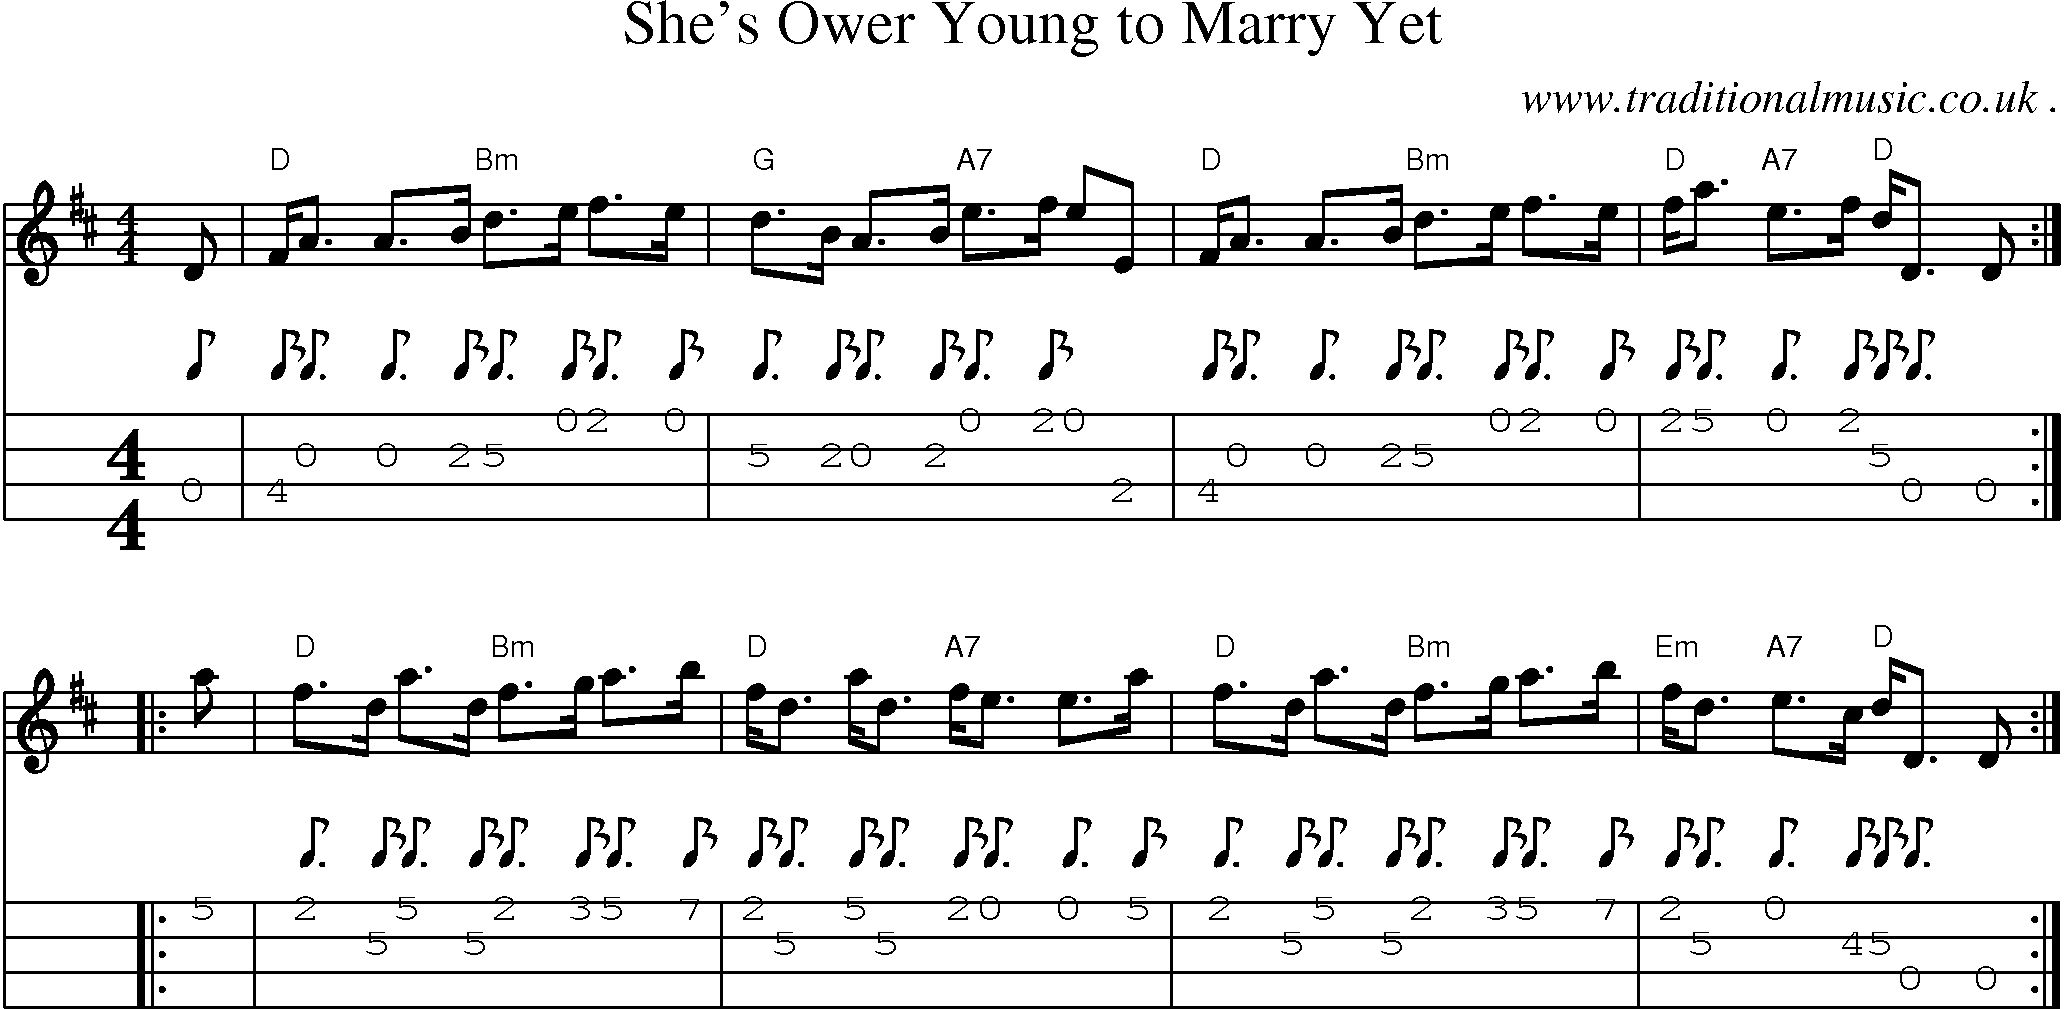 Sheet-music  score, Chords and Mandolin Tabs for Shes Ower Young To Marry Yet